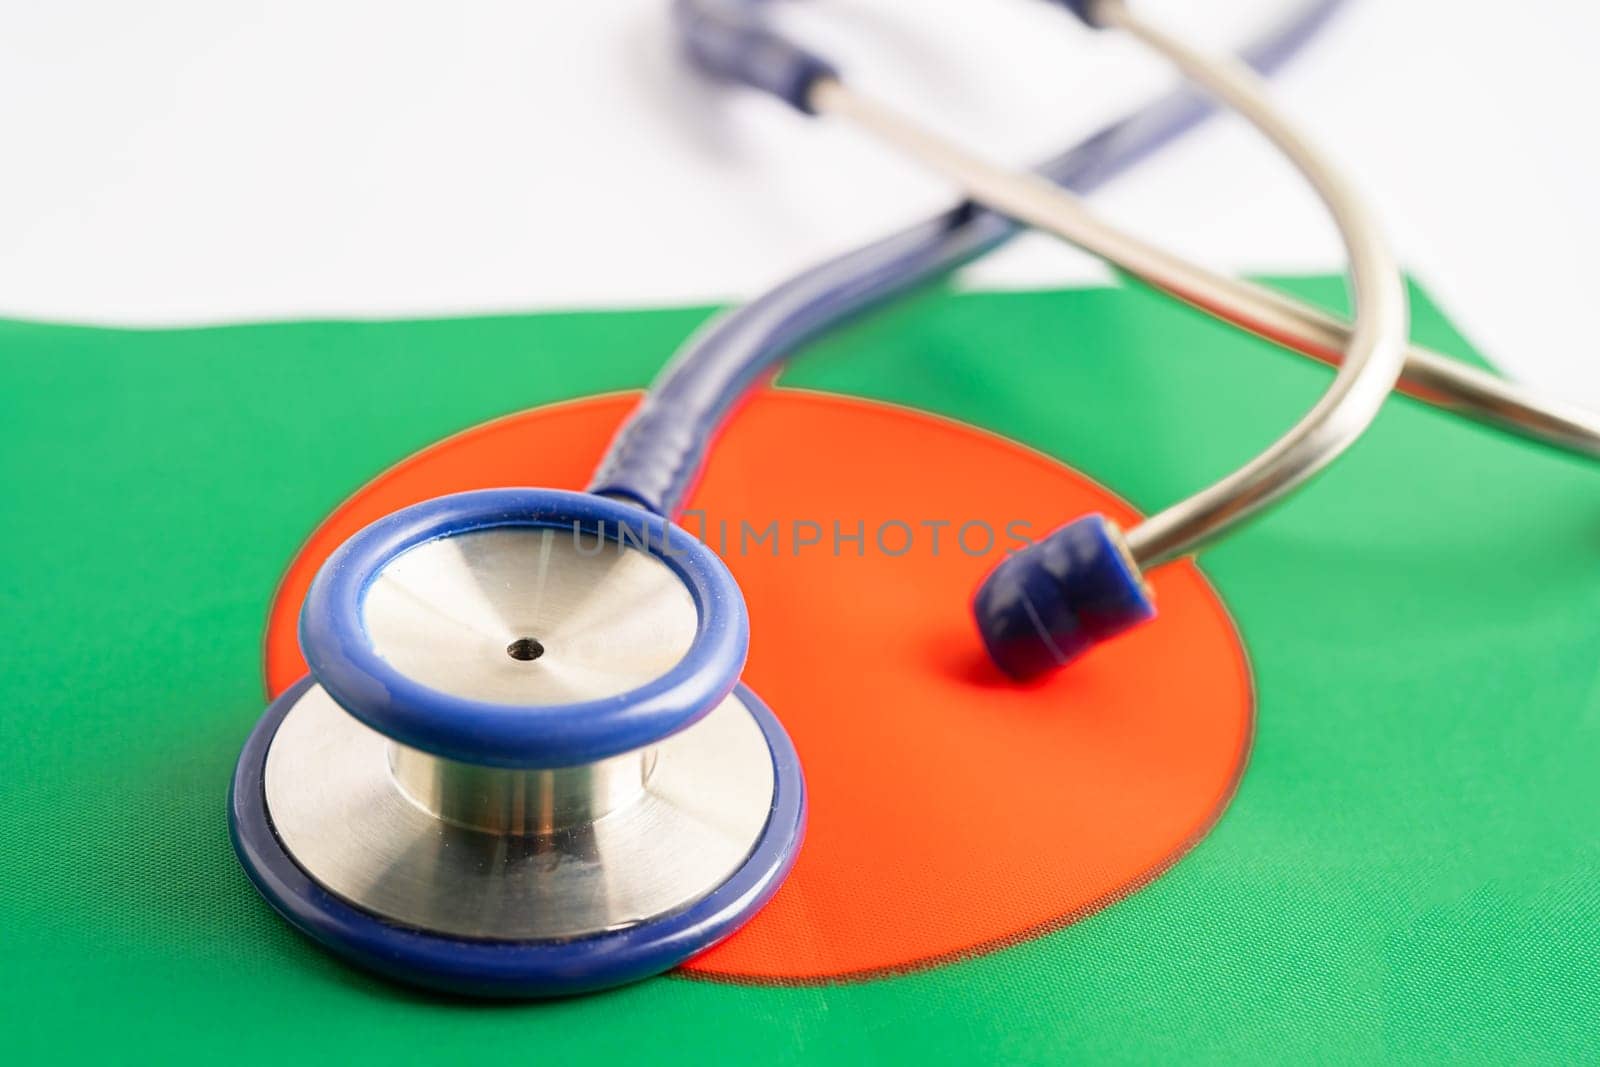 Stethoscope on Bangladesh flag background, Business and finance concept.